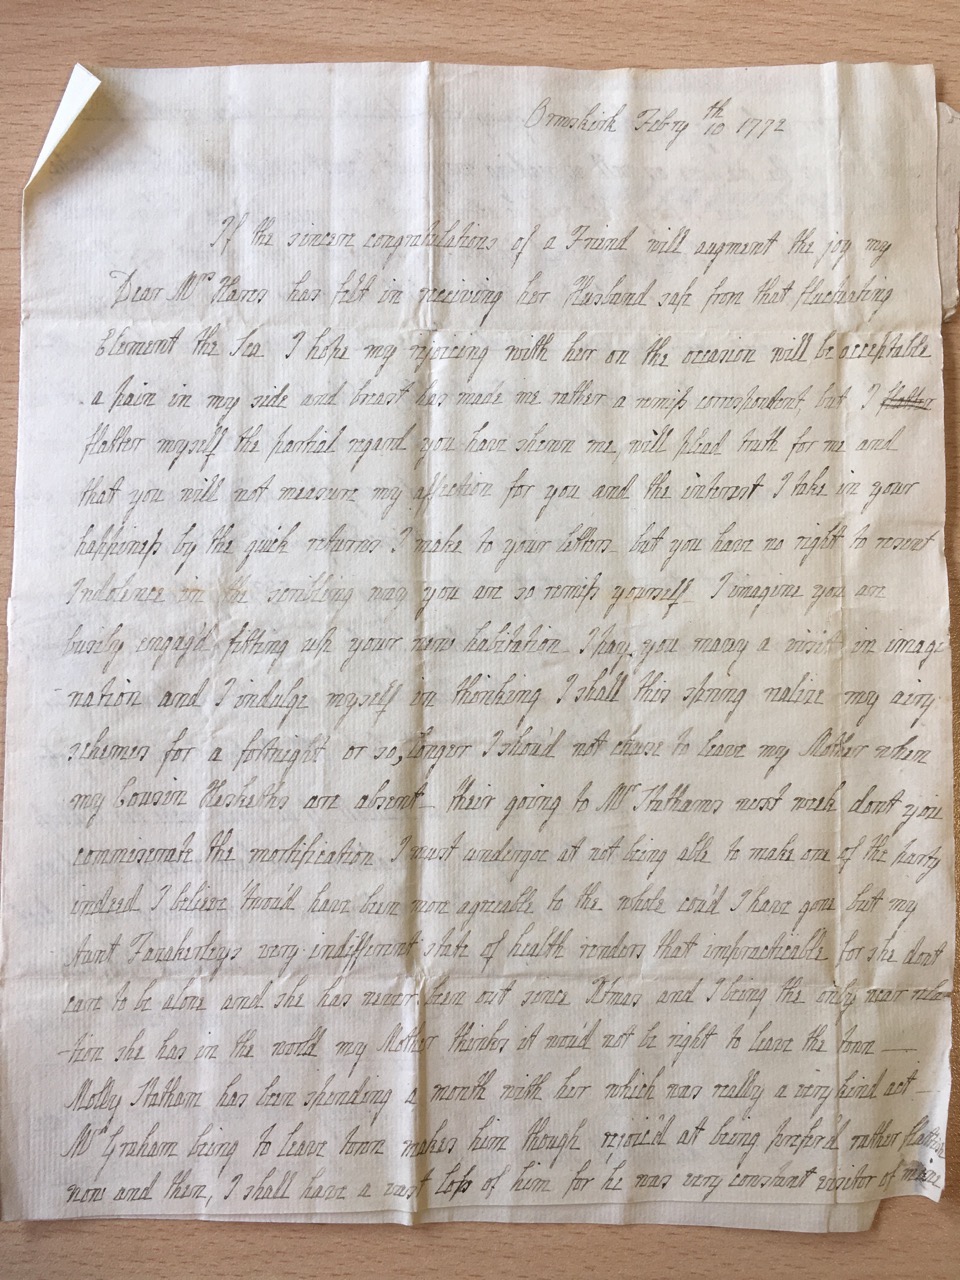 Image #1 of letter: J[enny] Brownsword to Ann Hare, 10 February 1772